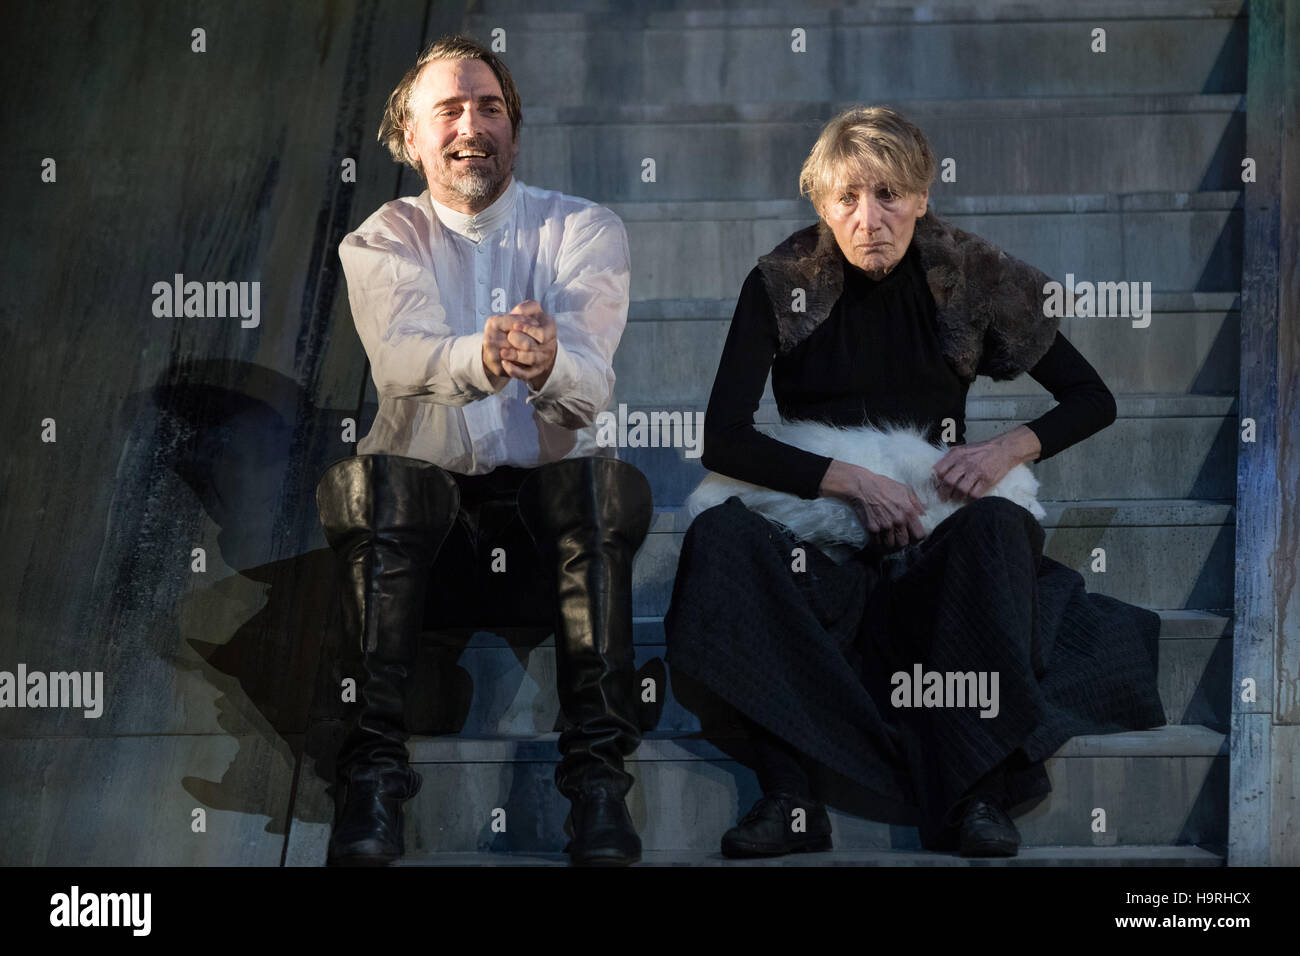 Hamburg, Germany. 23rd Nov, 2016. The actor Jens Harzer as Hauke Haien and Barbara Nuesse as Trin Jans stand on stage of the Thalia Theatre for the photo rehearsal of the play 'Der Schimmelreiter' (lit. 'The rider of the white horse') in Hamburg, Germany, 23 November 2016. The play by Th. Storm and J. Simons will have its premiere on the 25 November 2016. © dpa/Alamy Live News Stock Photo